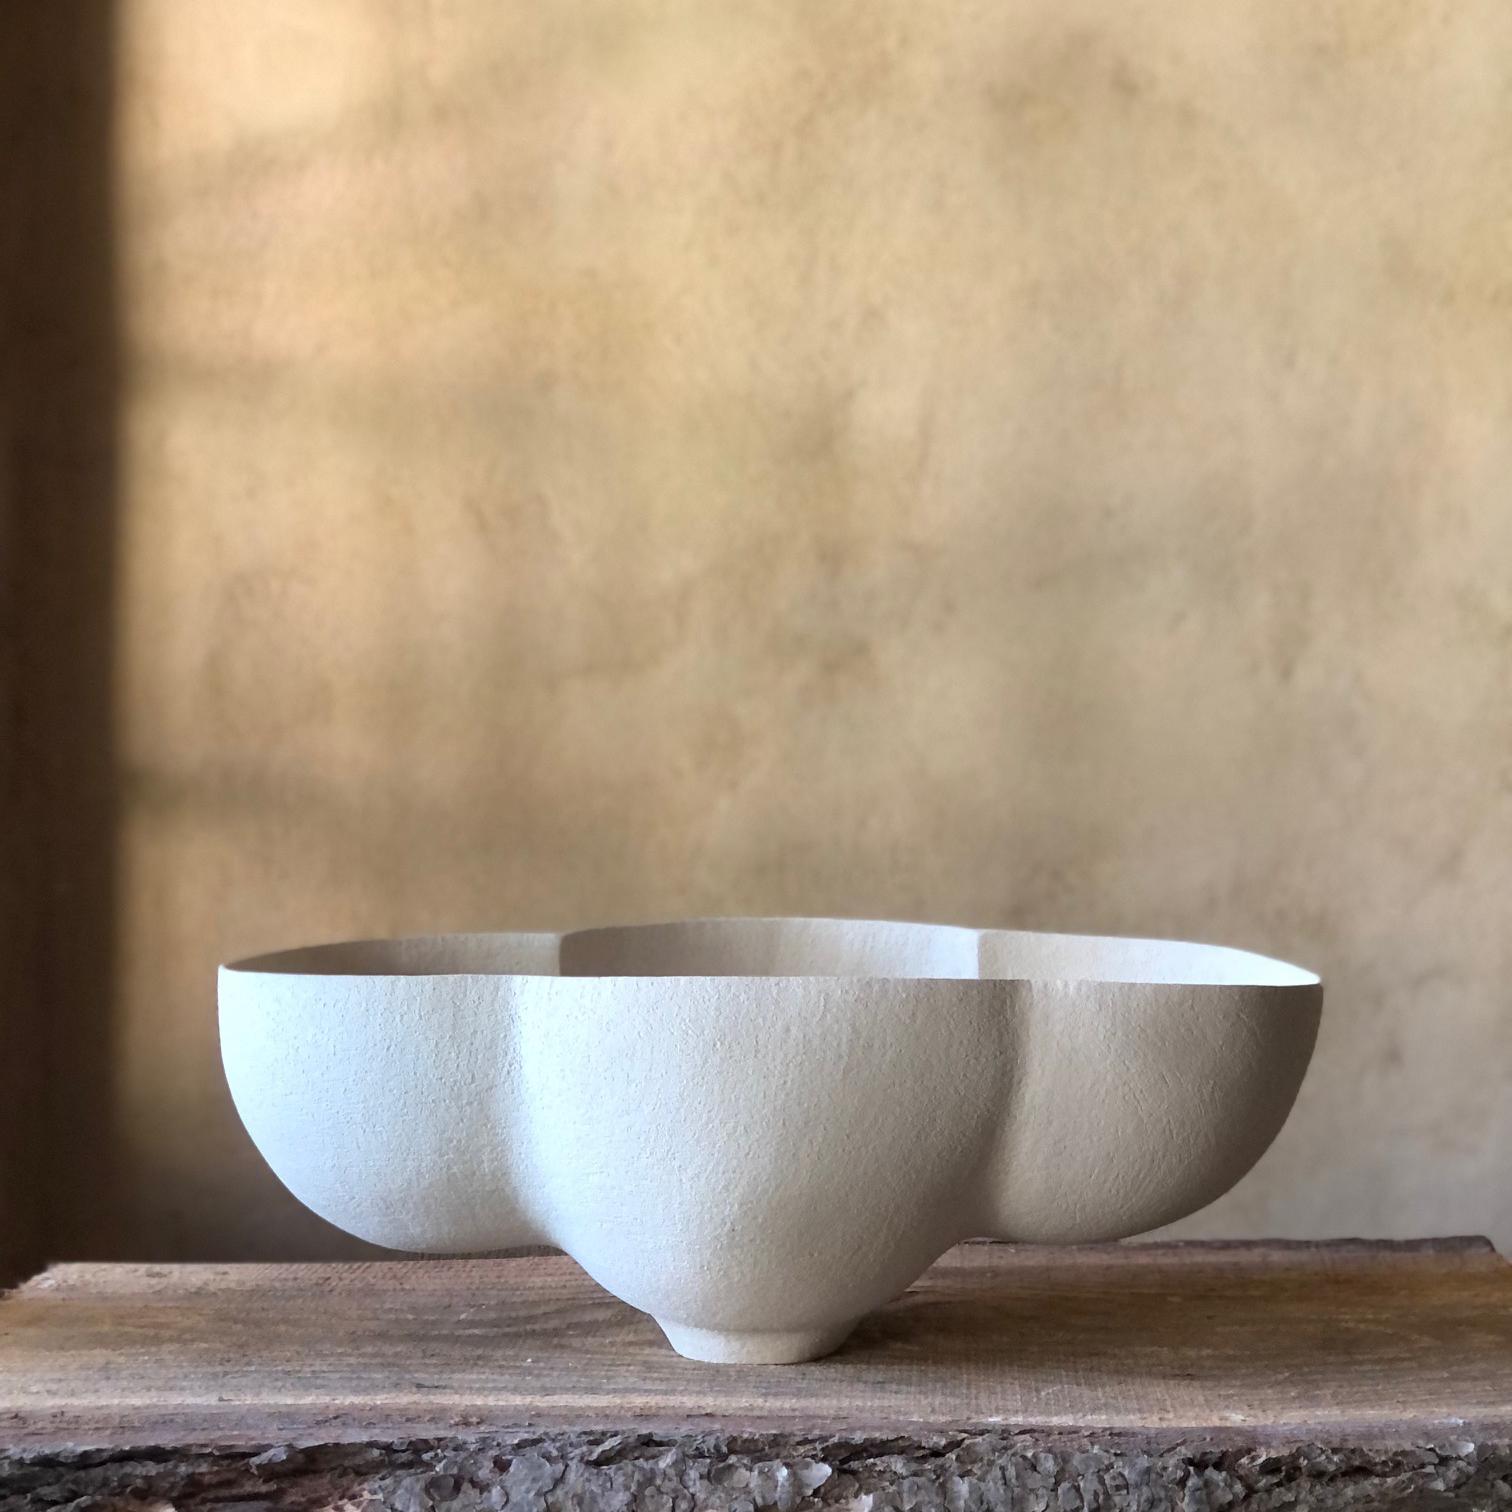 Triple Bowl by Sophie Vaidie
One Of A Kind.
Dimensions: D 27 x W 46 x H 17 cm. 
Materials: Brutal Beige stoneware with fine chamotte.

In the beginning, there was a need to make, with the hands, the touch, the senses. Then came the desire to create